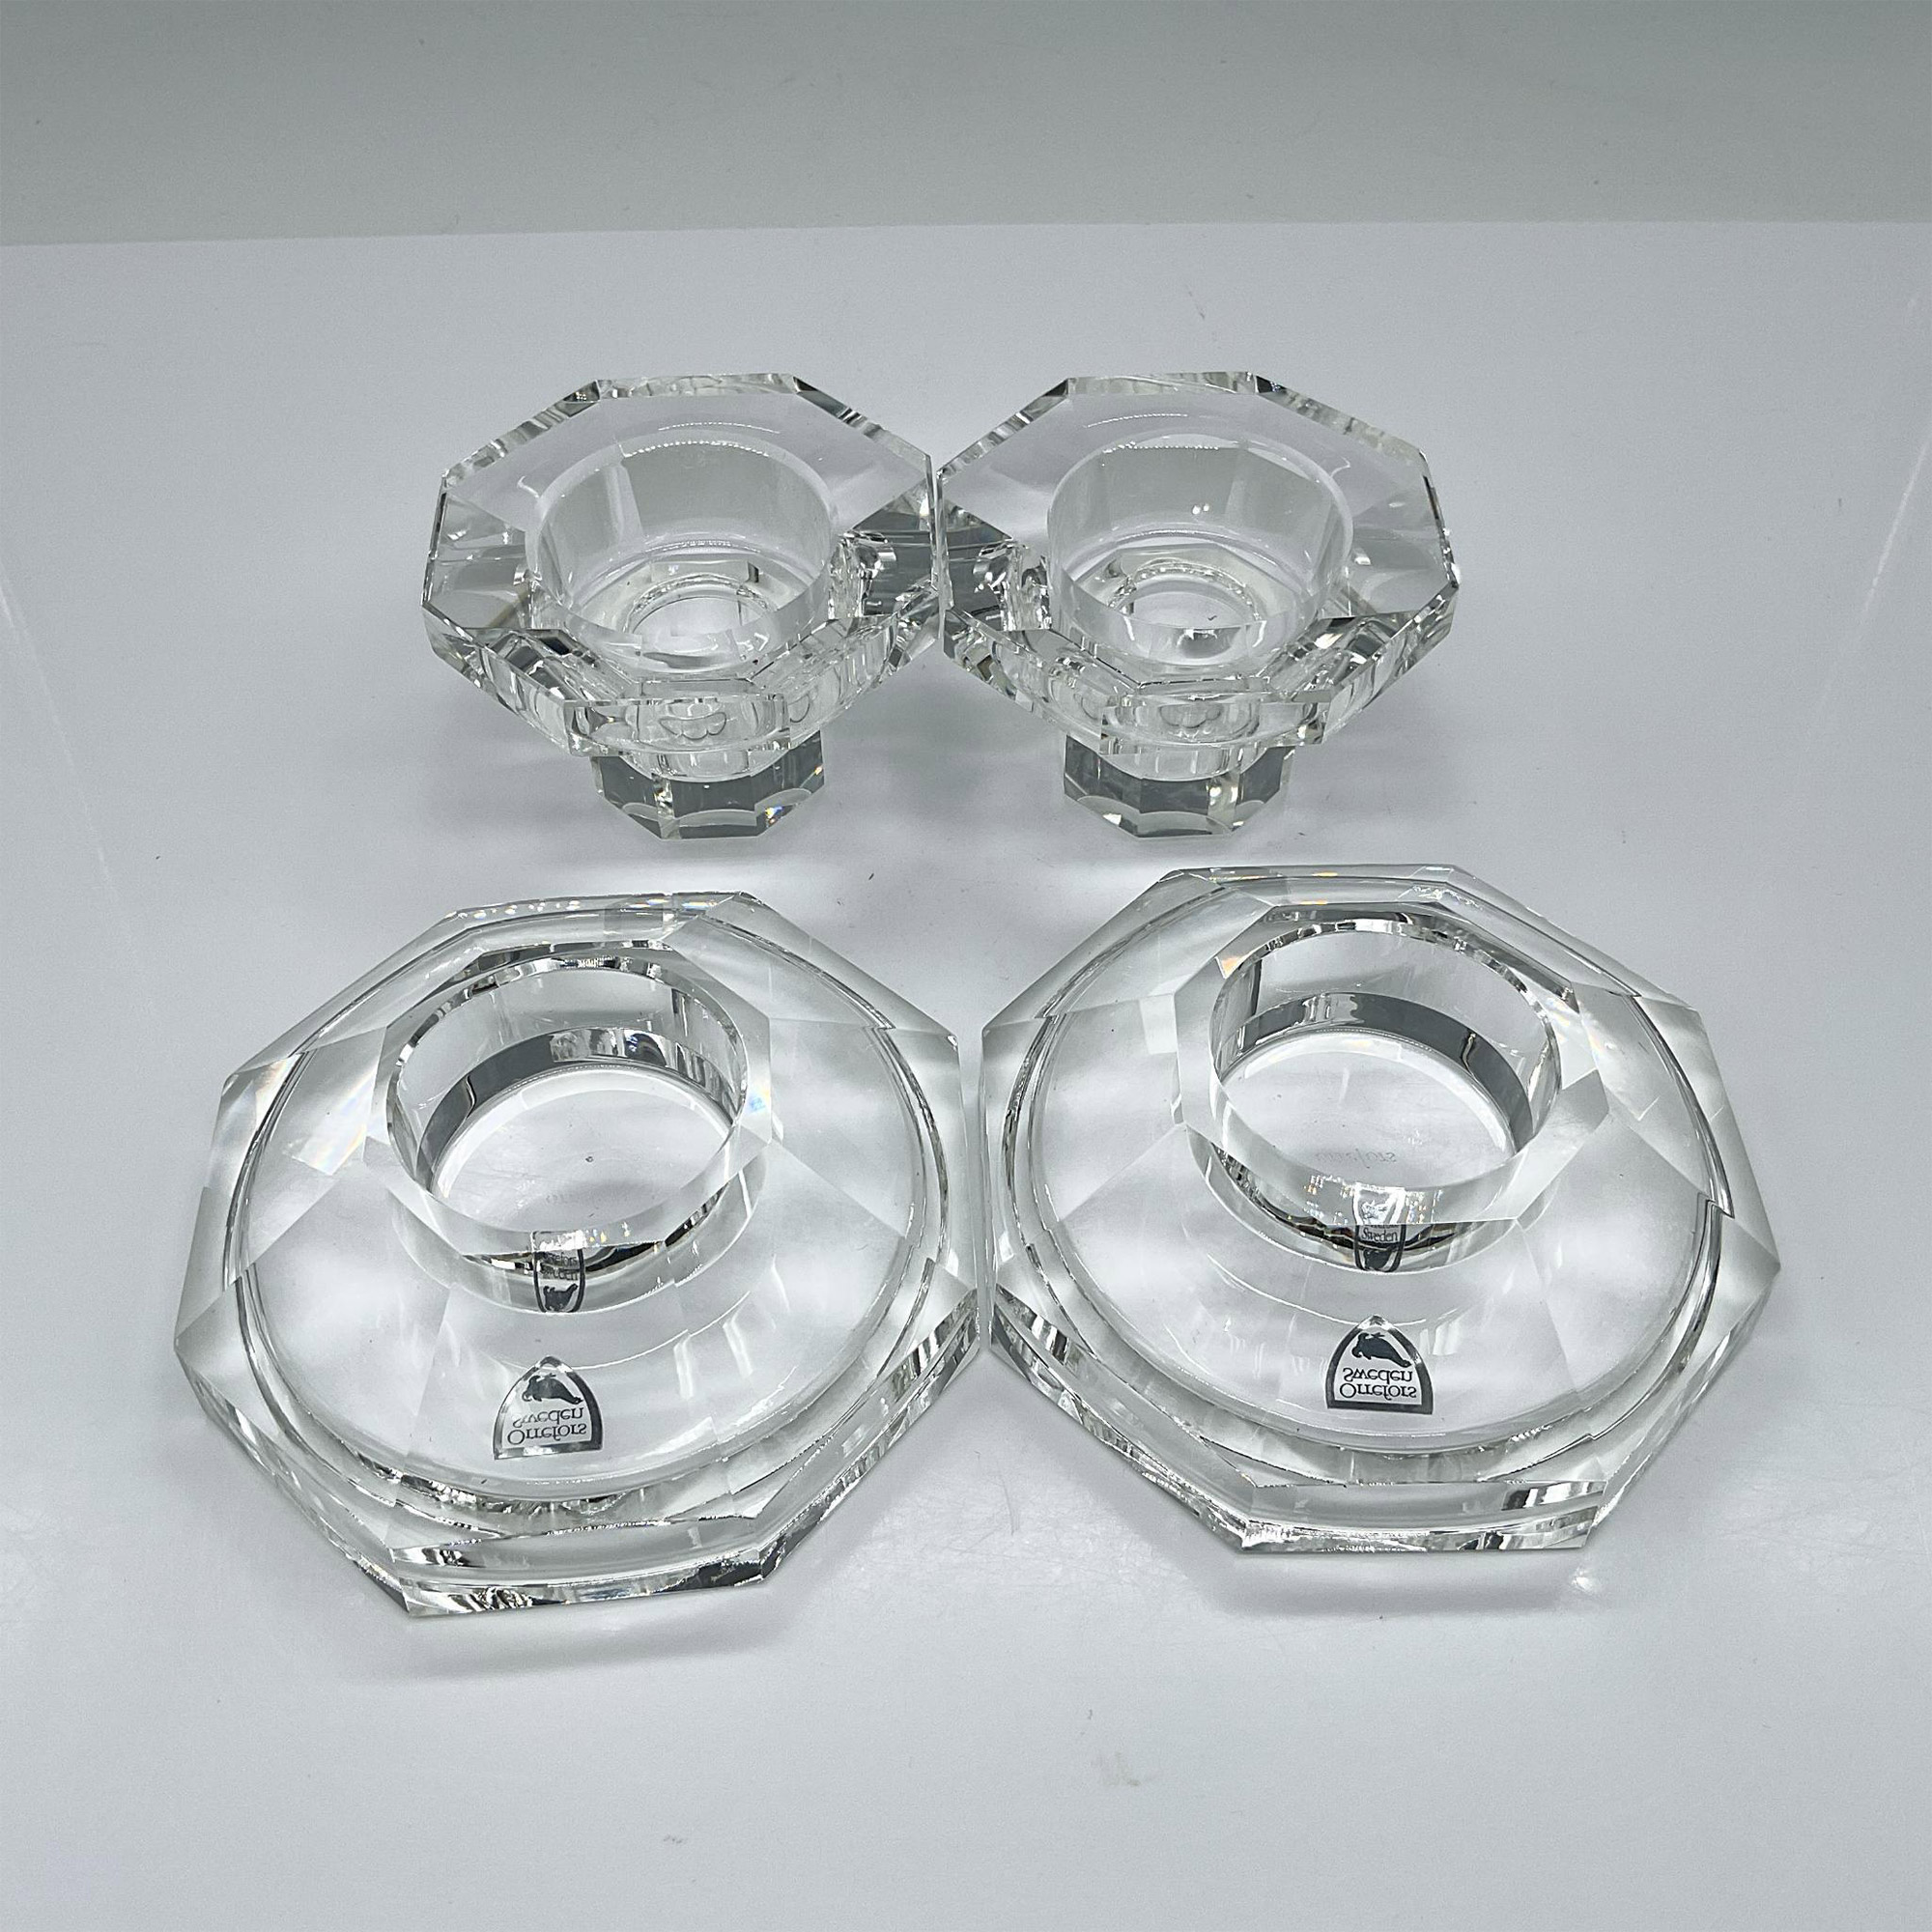 2pc Orrefors Crystal Candle Holders, Totem Trio - Image 3 of 4